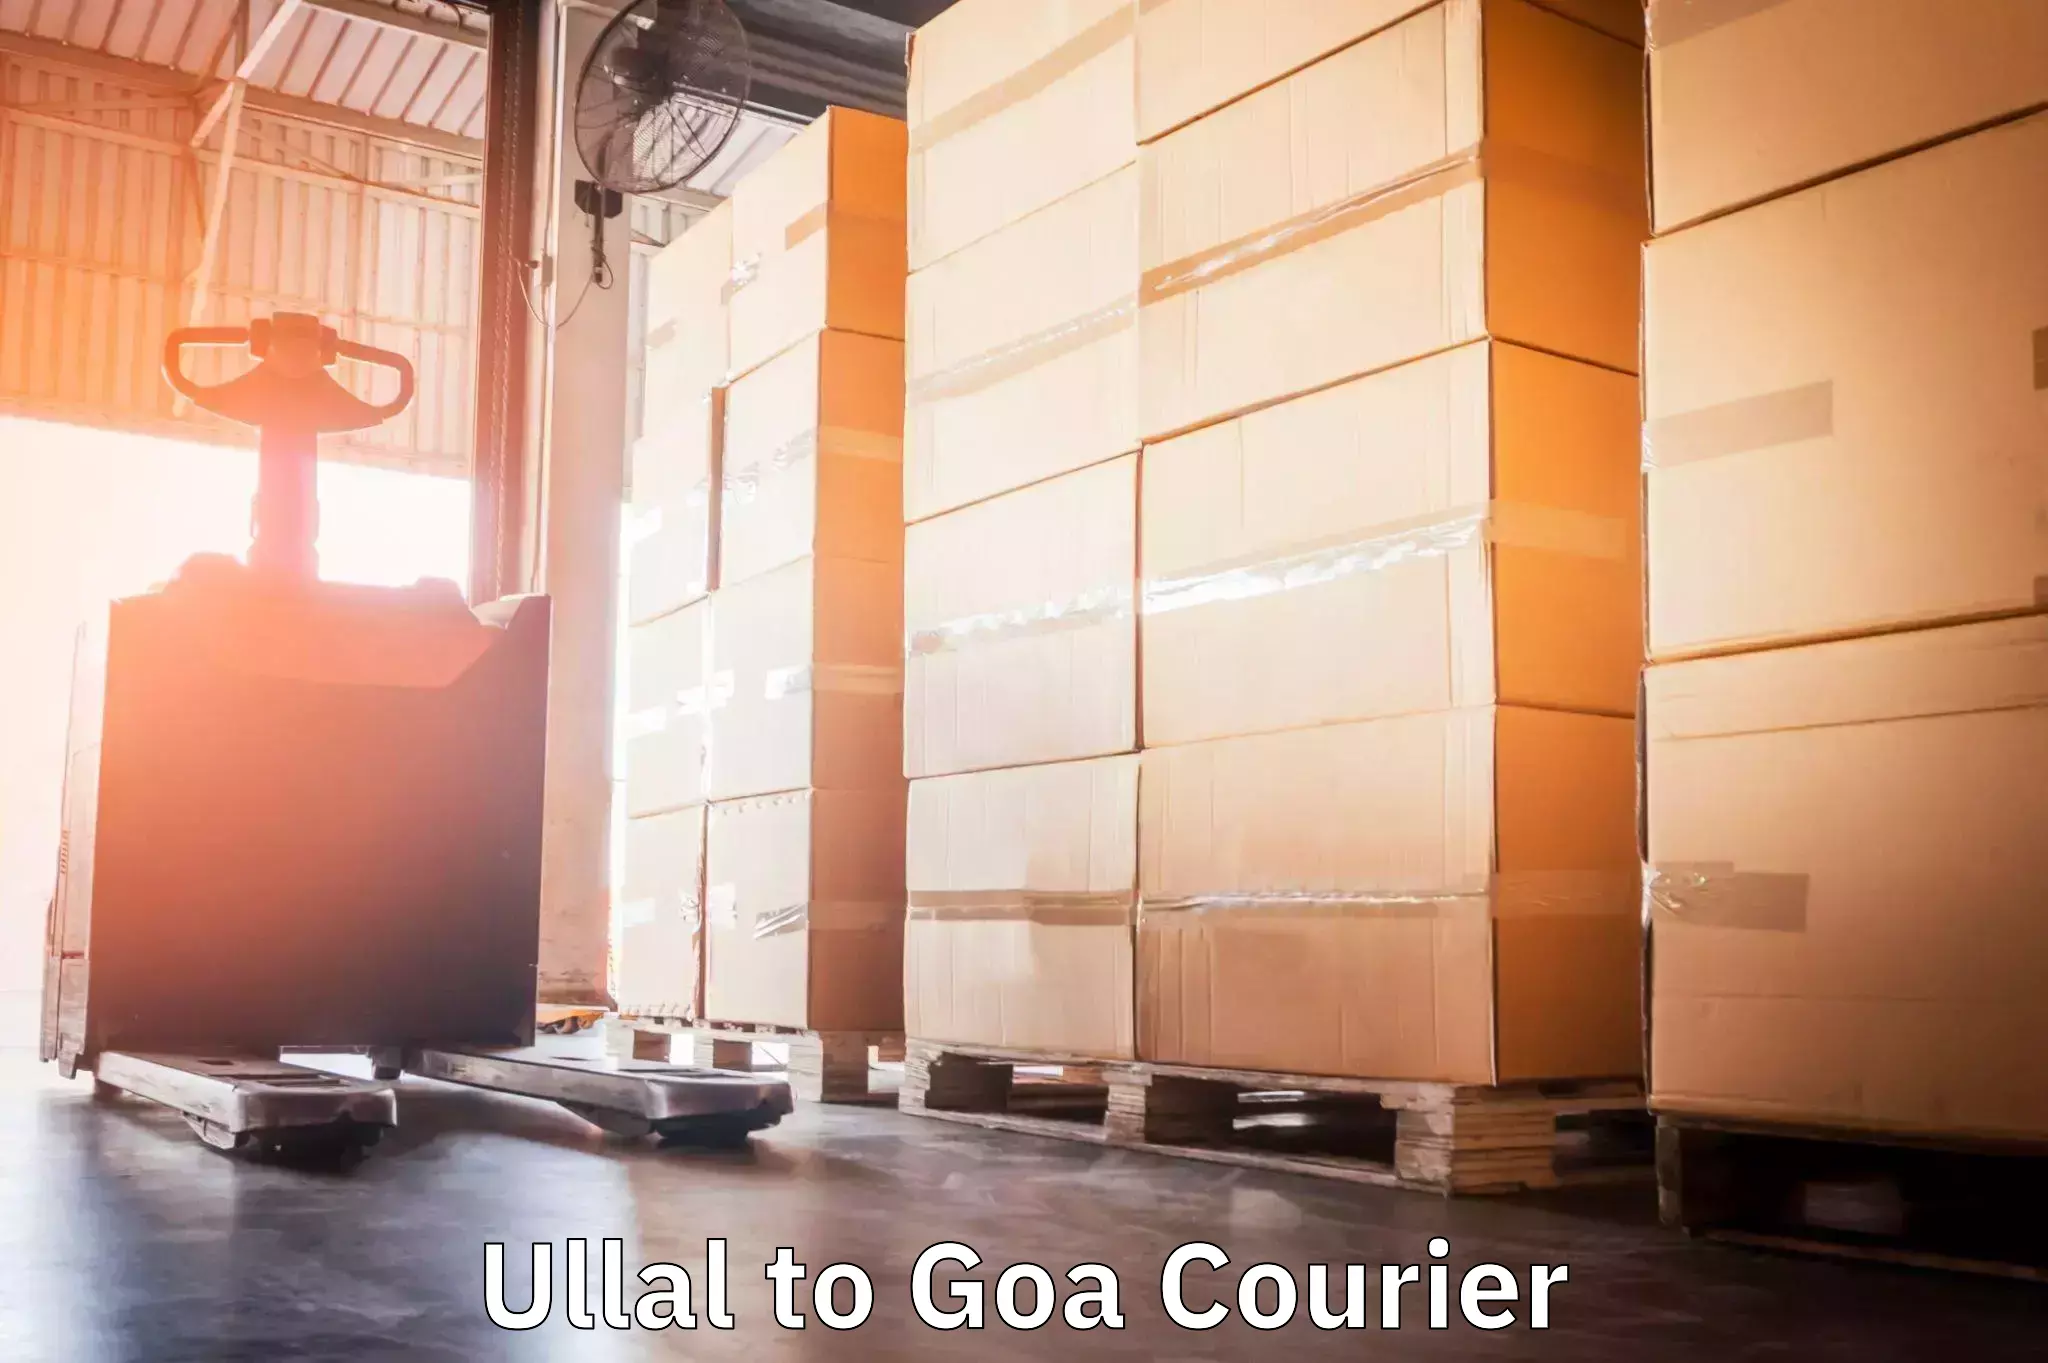 24-hour courier service Ullal to Panaji